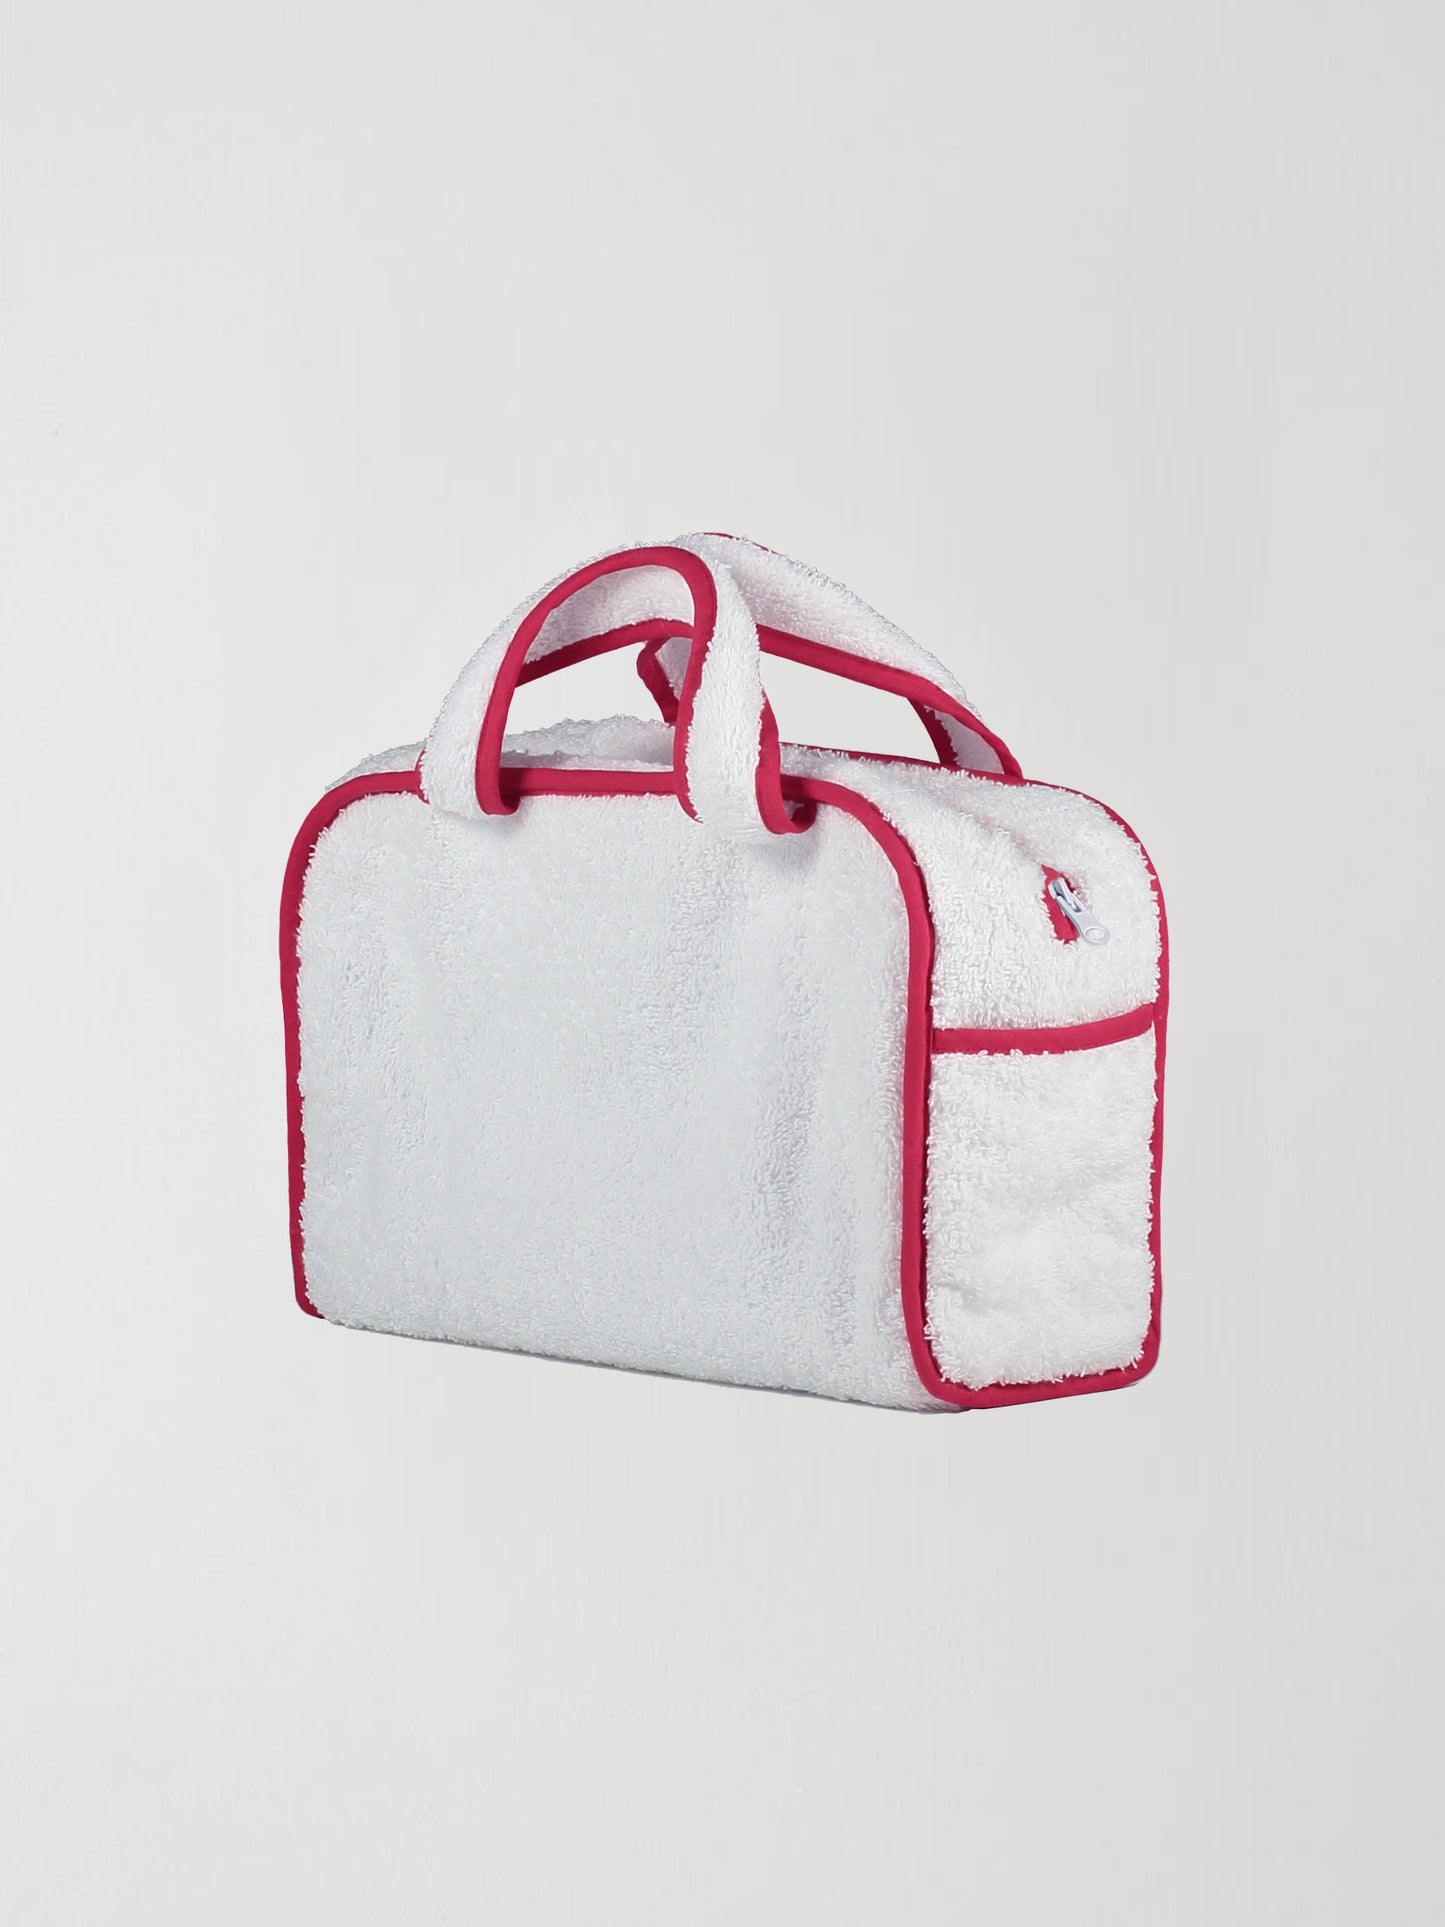 Back view of our white towel bag with red details on the edges and zipper closure.